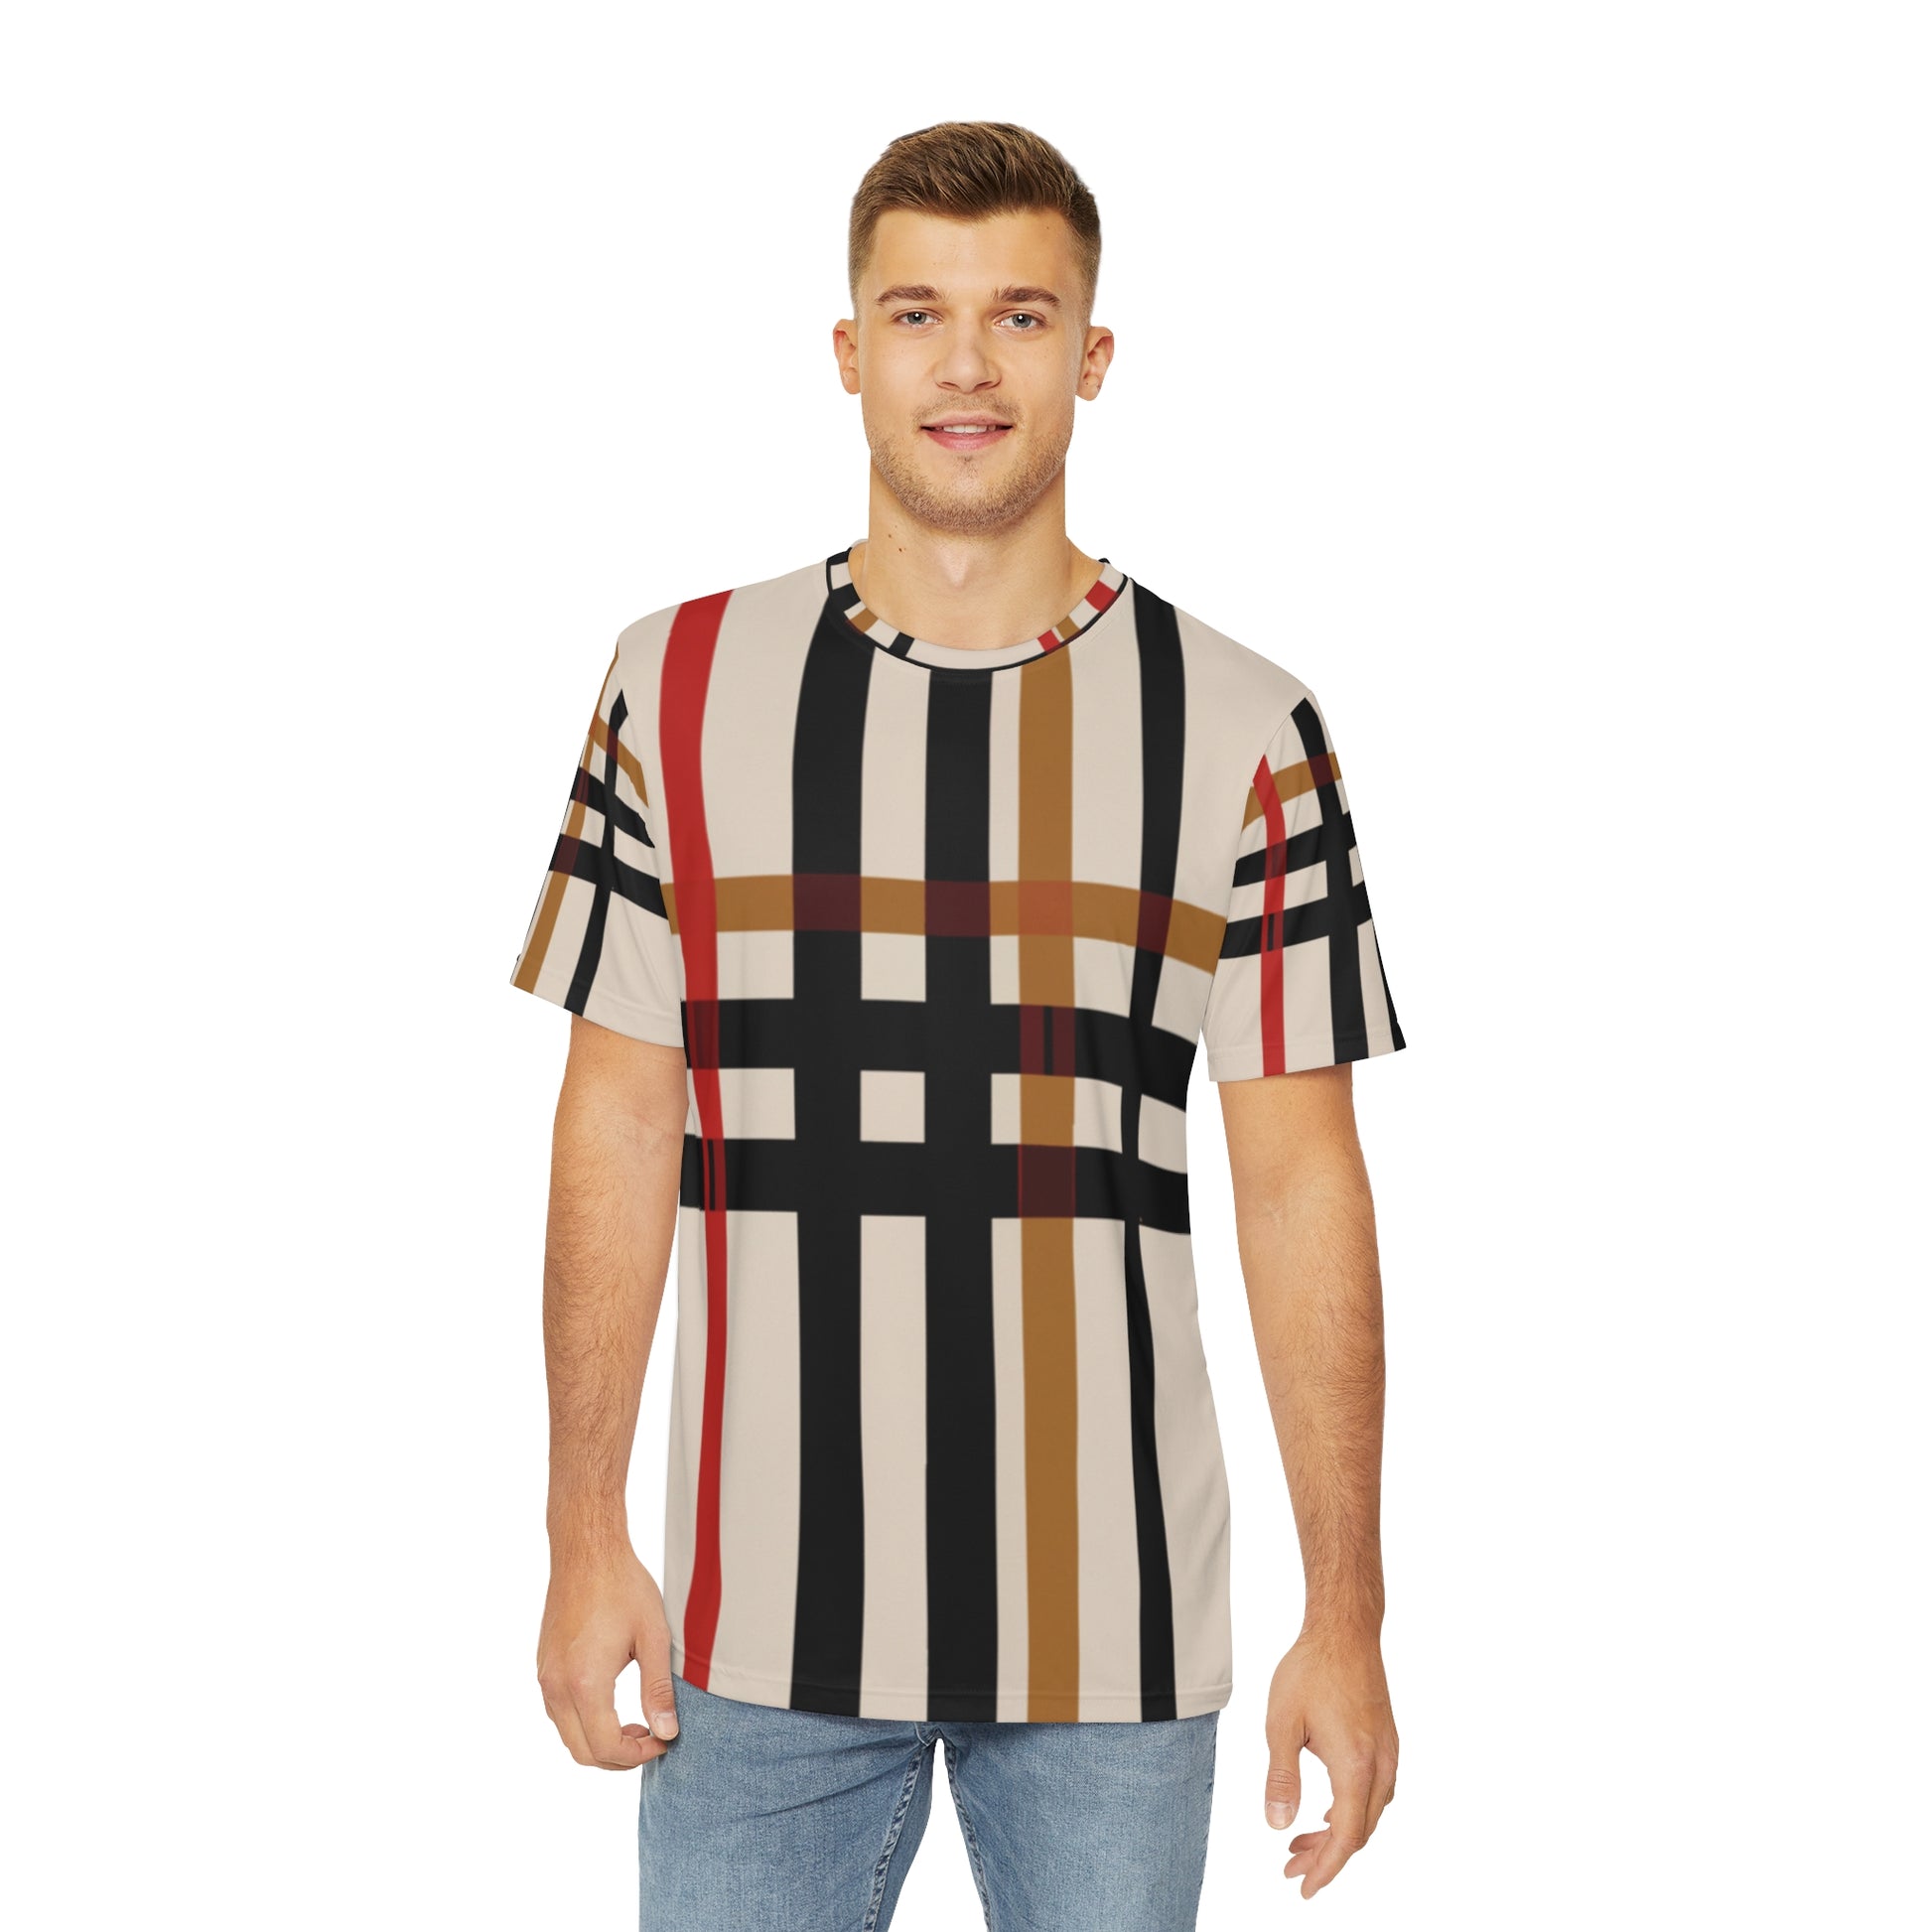 Front view of the Highland Ember Dawn Crewneck Pullover All-Over Print Short-Sleeved Shirt black red mustard yellow beige plaid pattern paired with casual denim jeans worn by white man